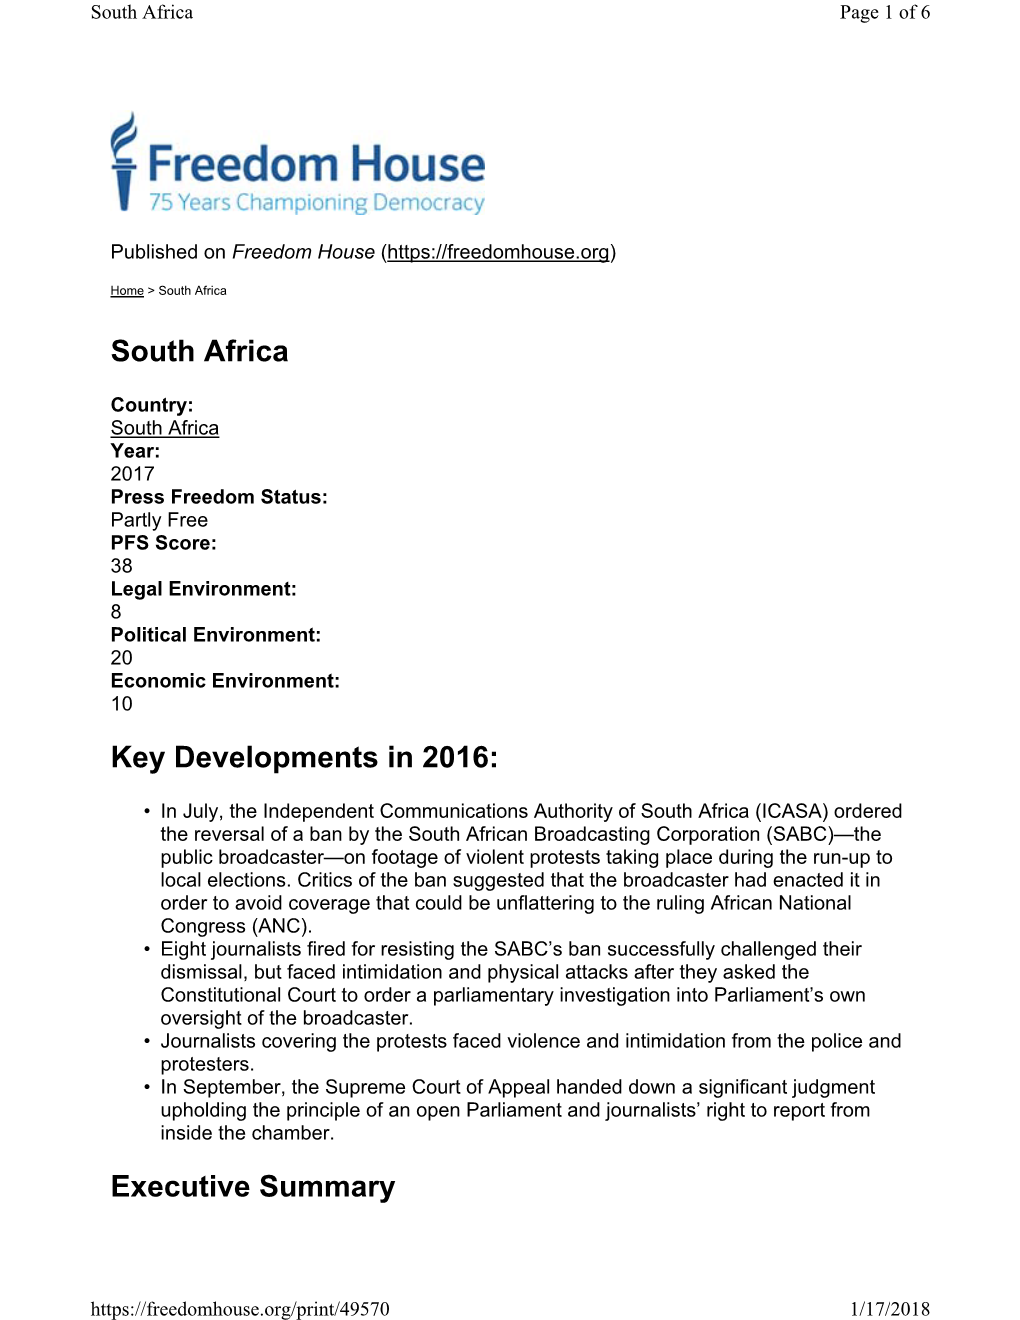 South Africa Key Developments in 2016: Executive Summary